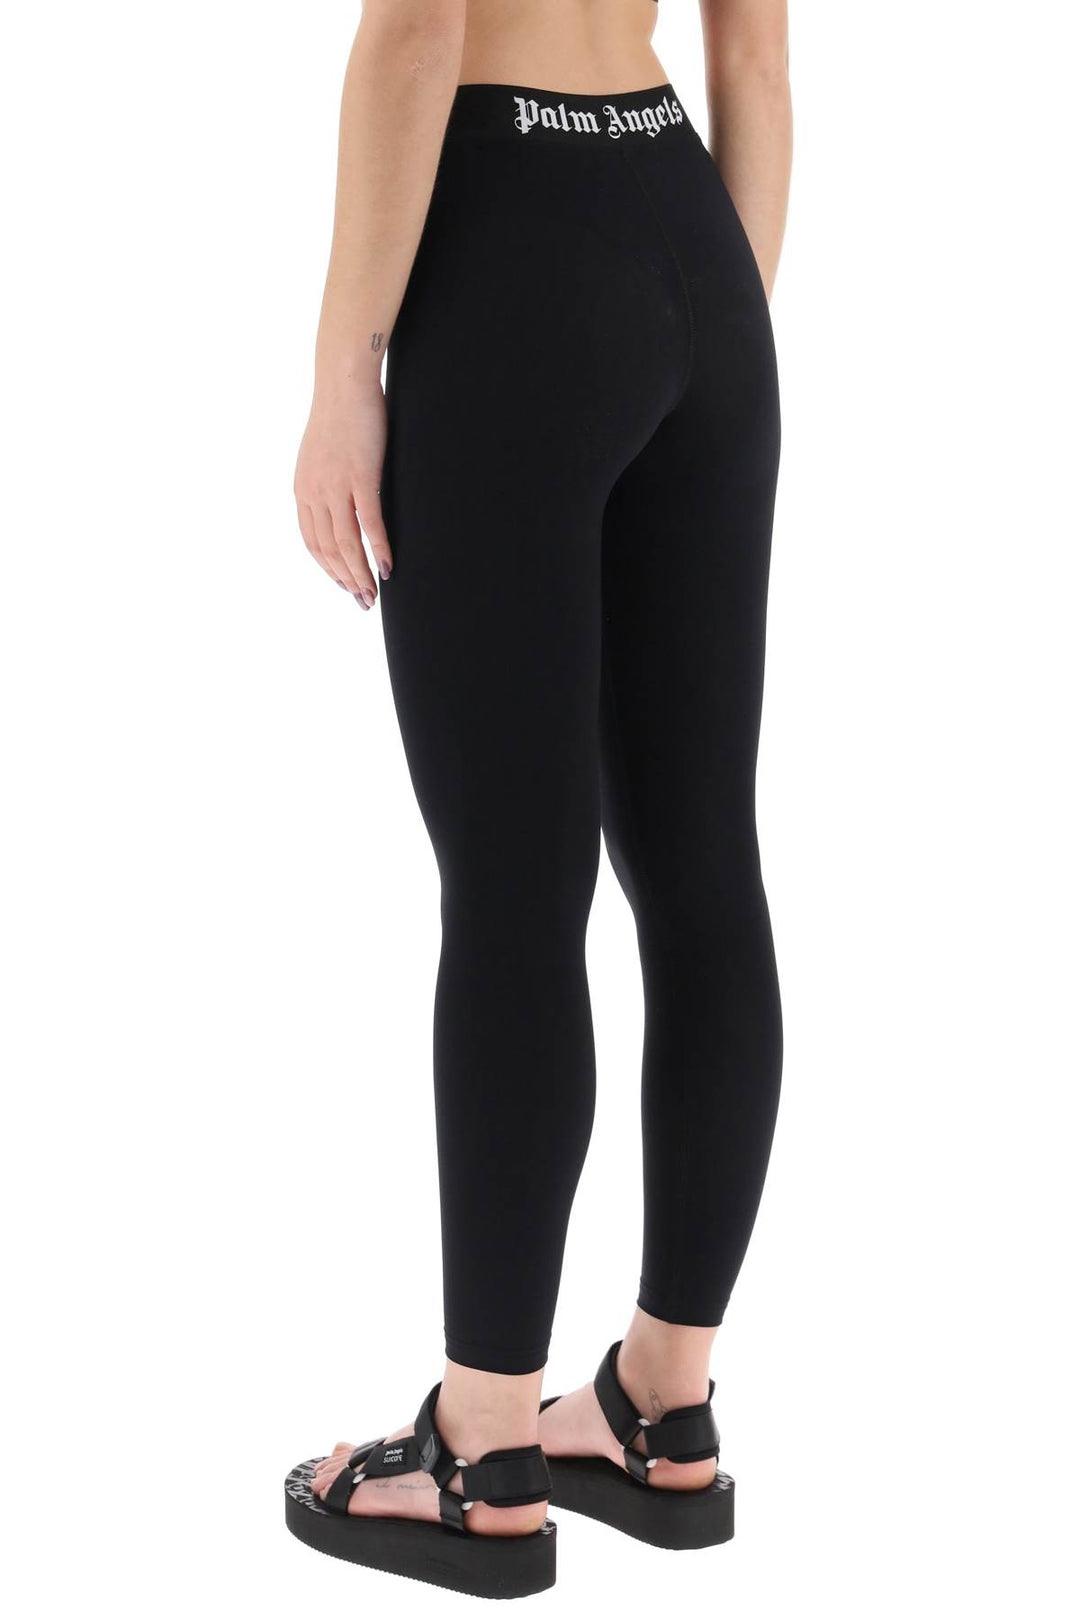 Palm Angels Sporty Leggings With Branded Stripe   Nero